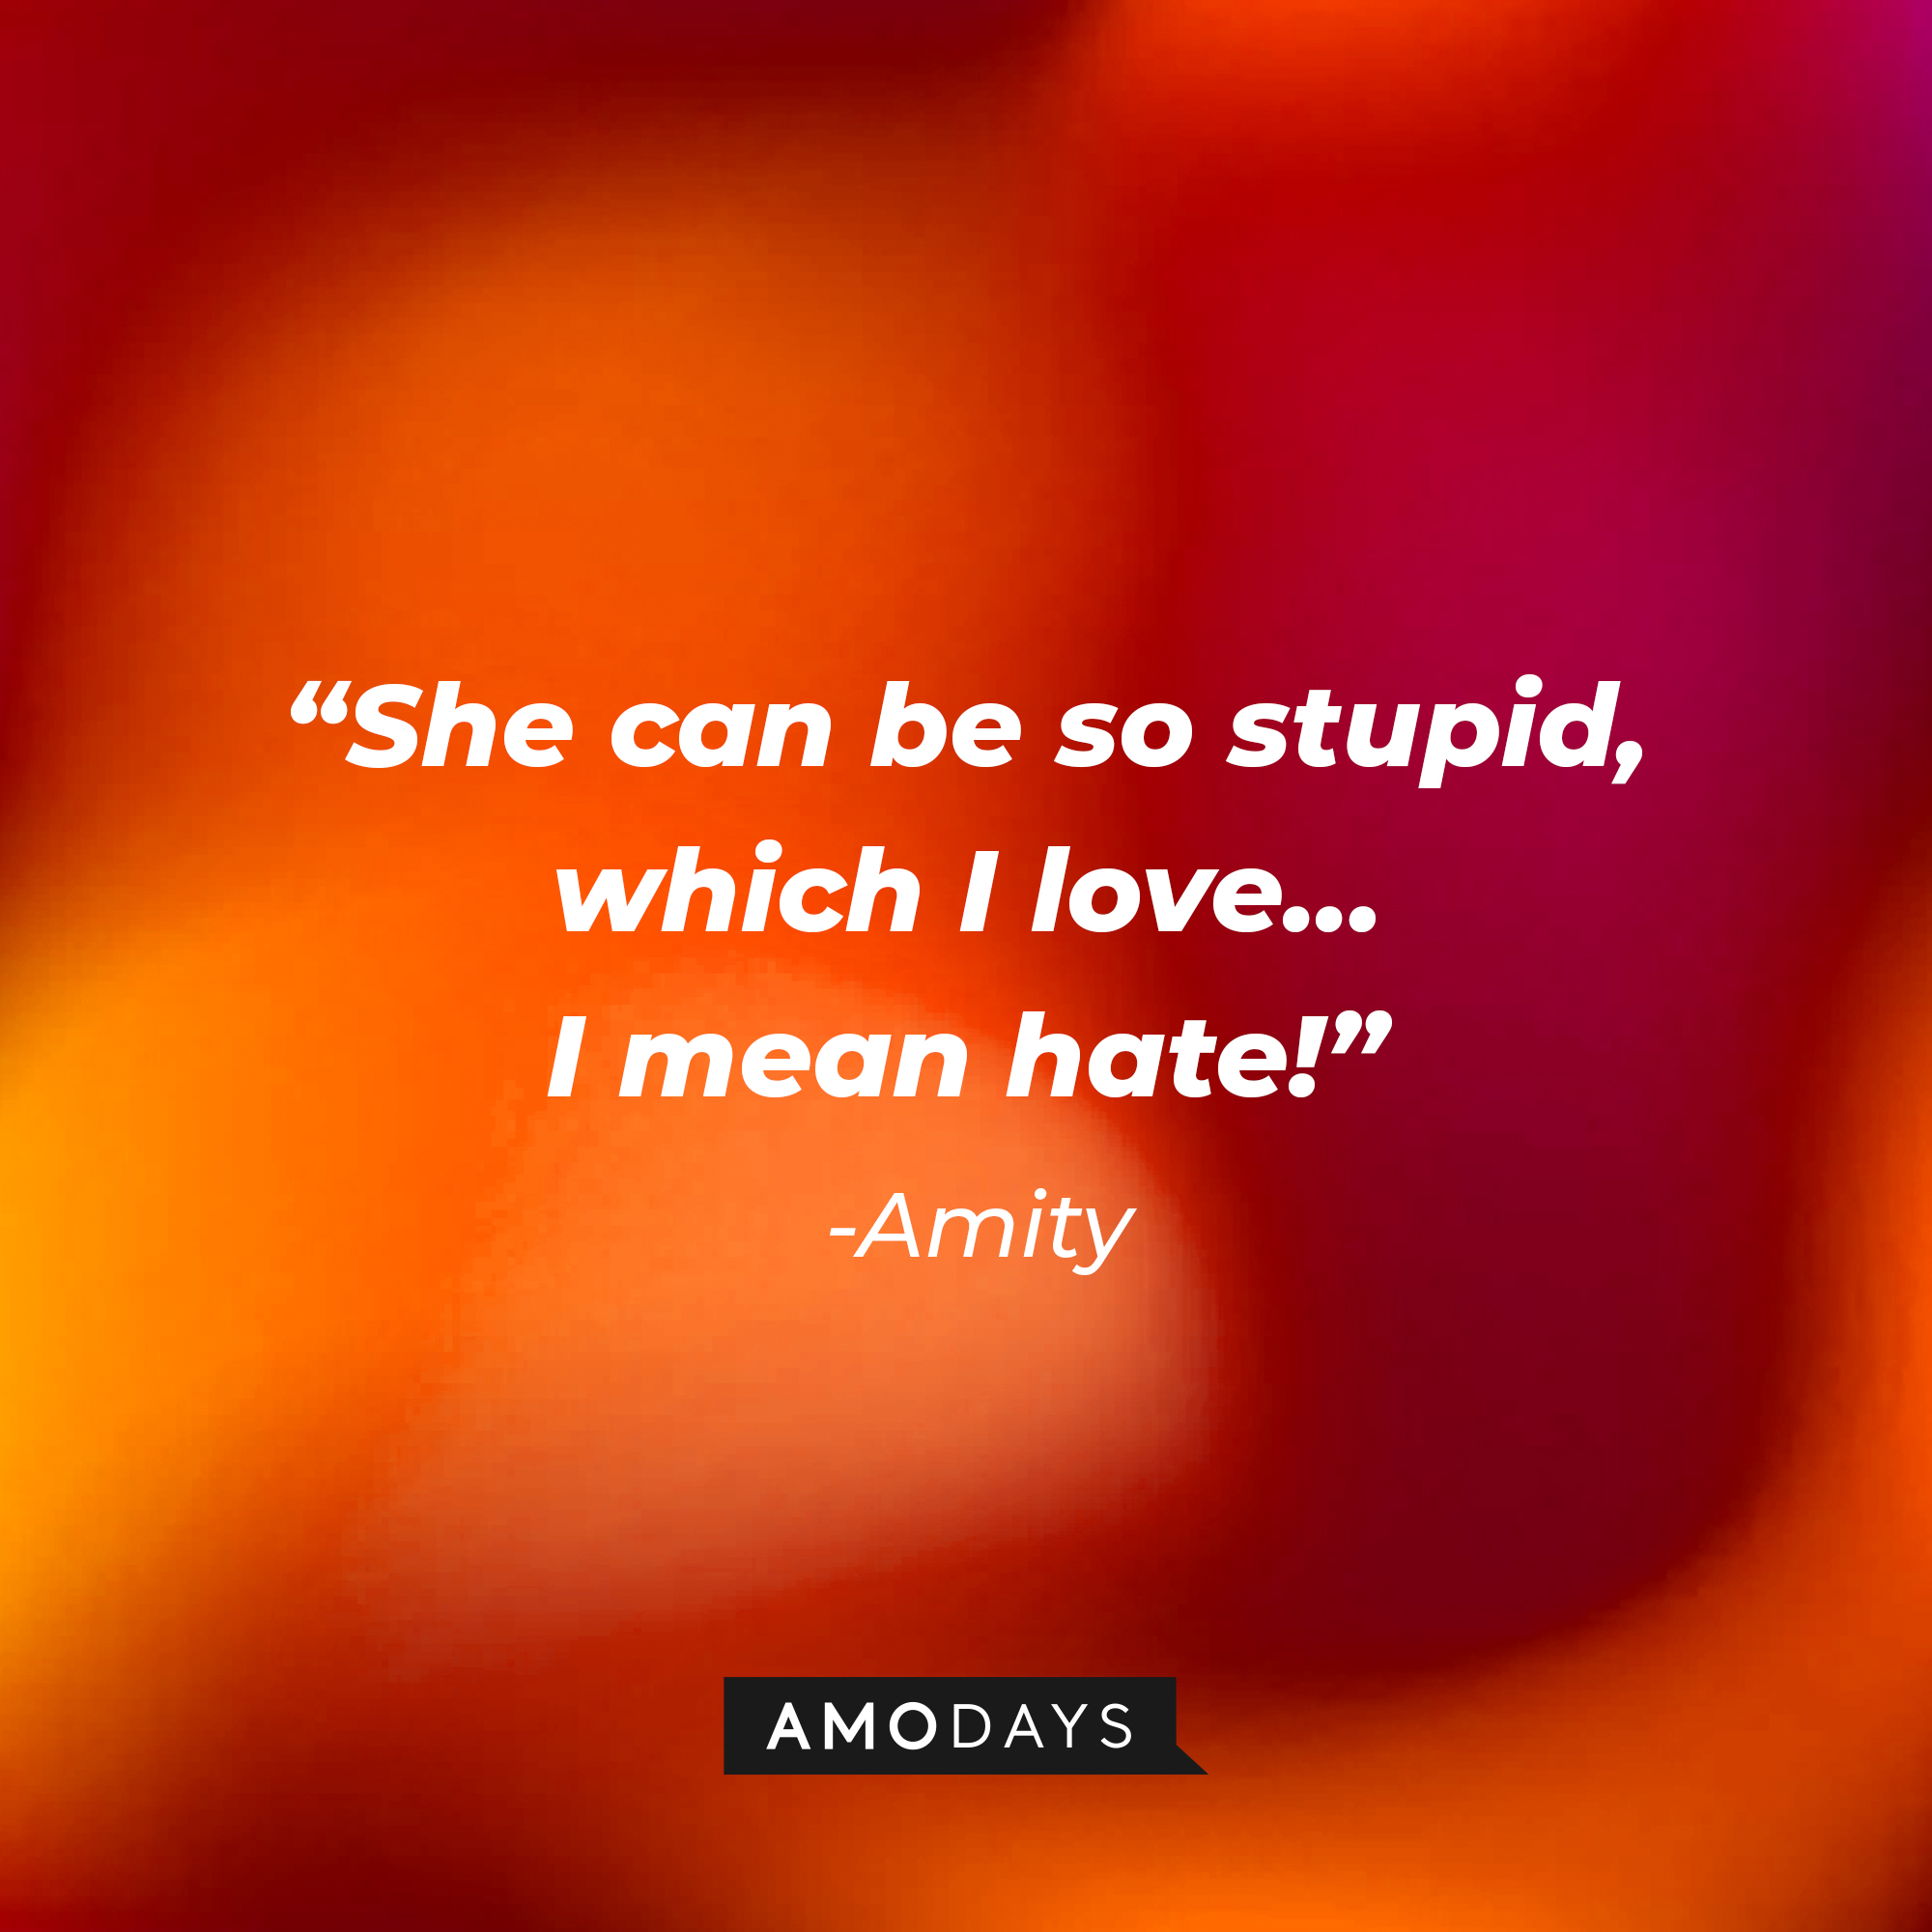 A photo with Amity's quote, "She can be so stupid, which I love… I mean hate!" | Source: Amodays